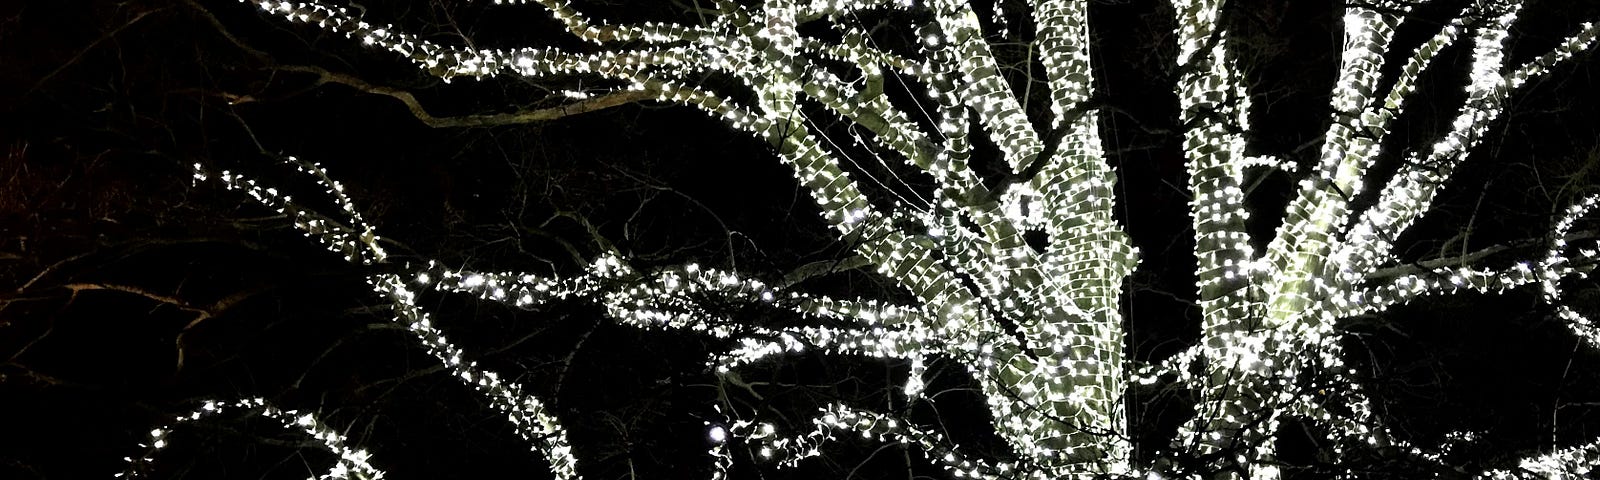 A tree covered in small decorative lights against the night sky.